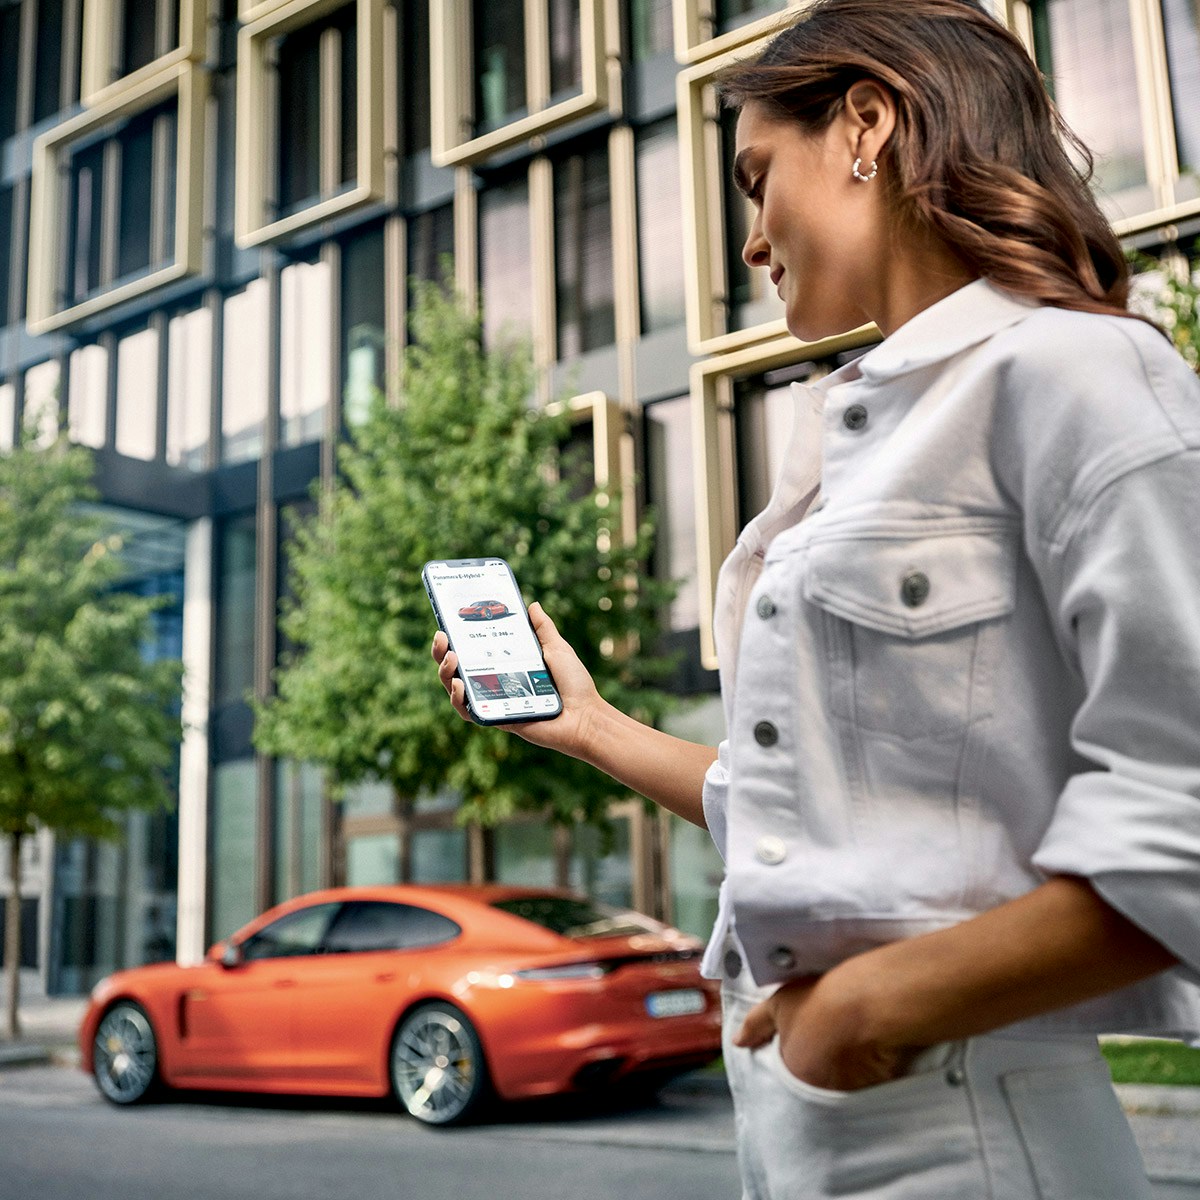 A young woman in the street, looking into a smartphone that is holding in her hand and a Porsche in the background.